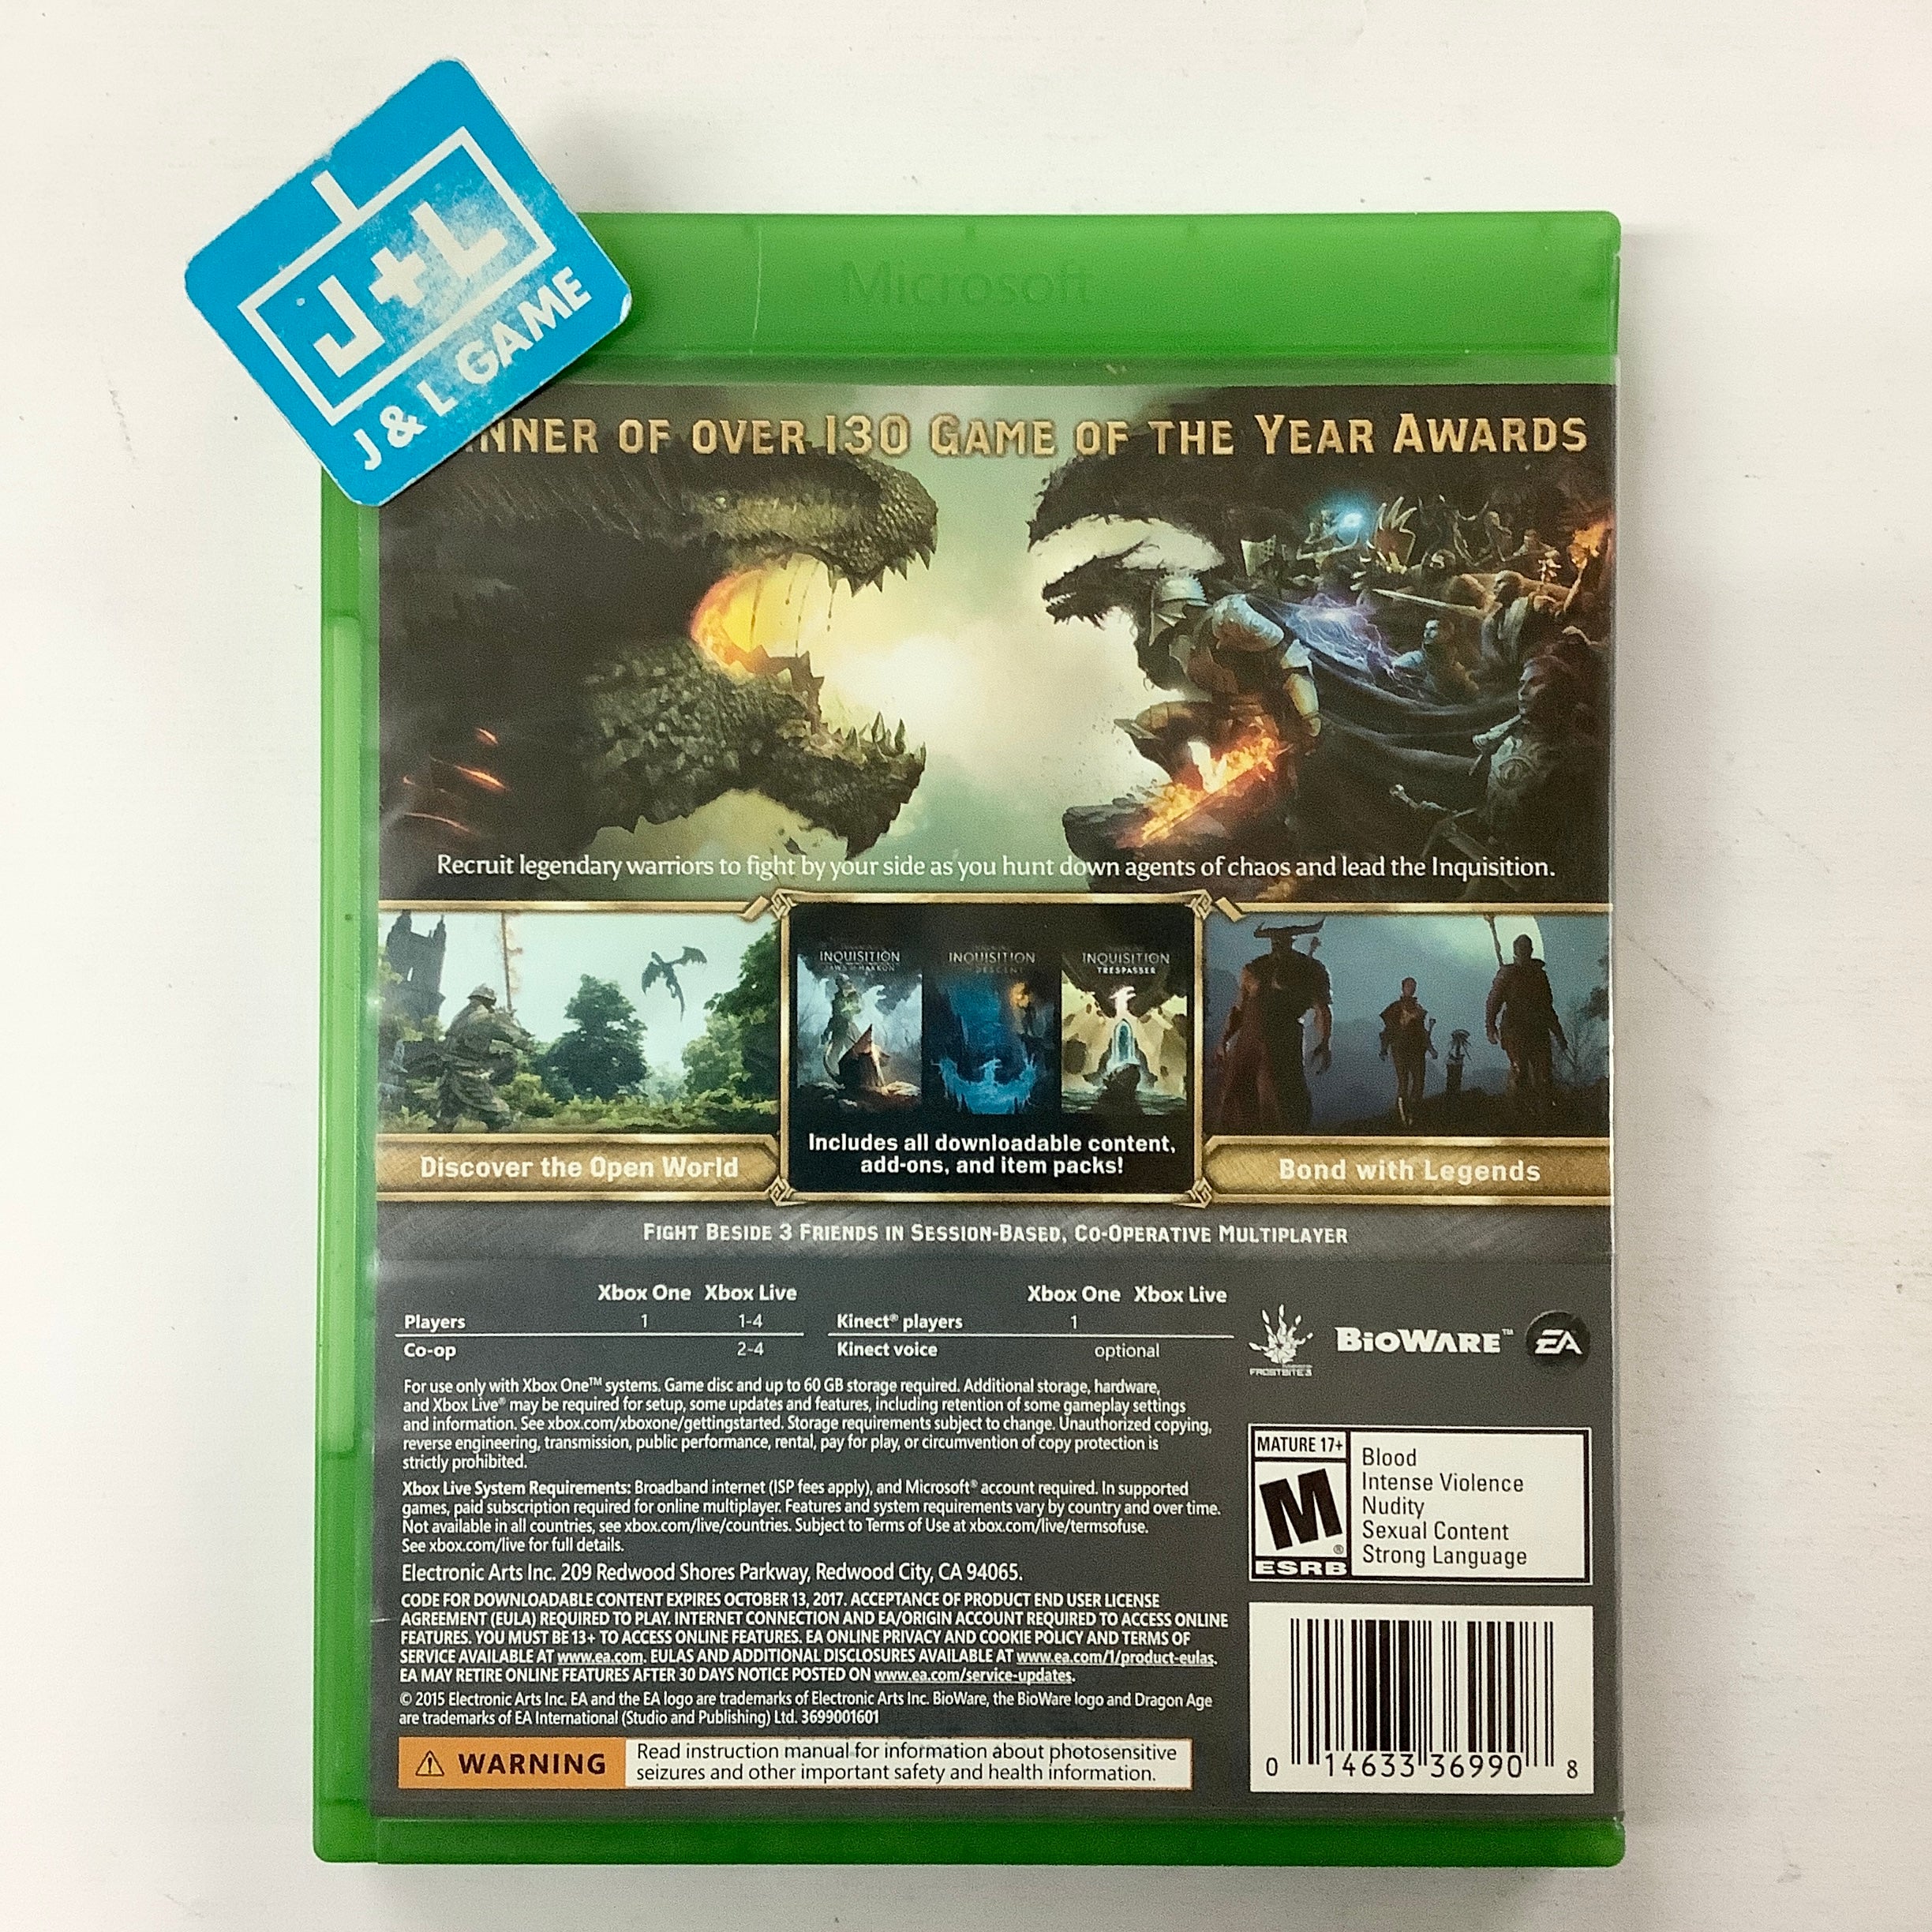 Dragon Age: Inquisition (Game of the Year Edition) - (XB1) Xbox One [Pre-Owned] Video Games Electronic Arts   